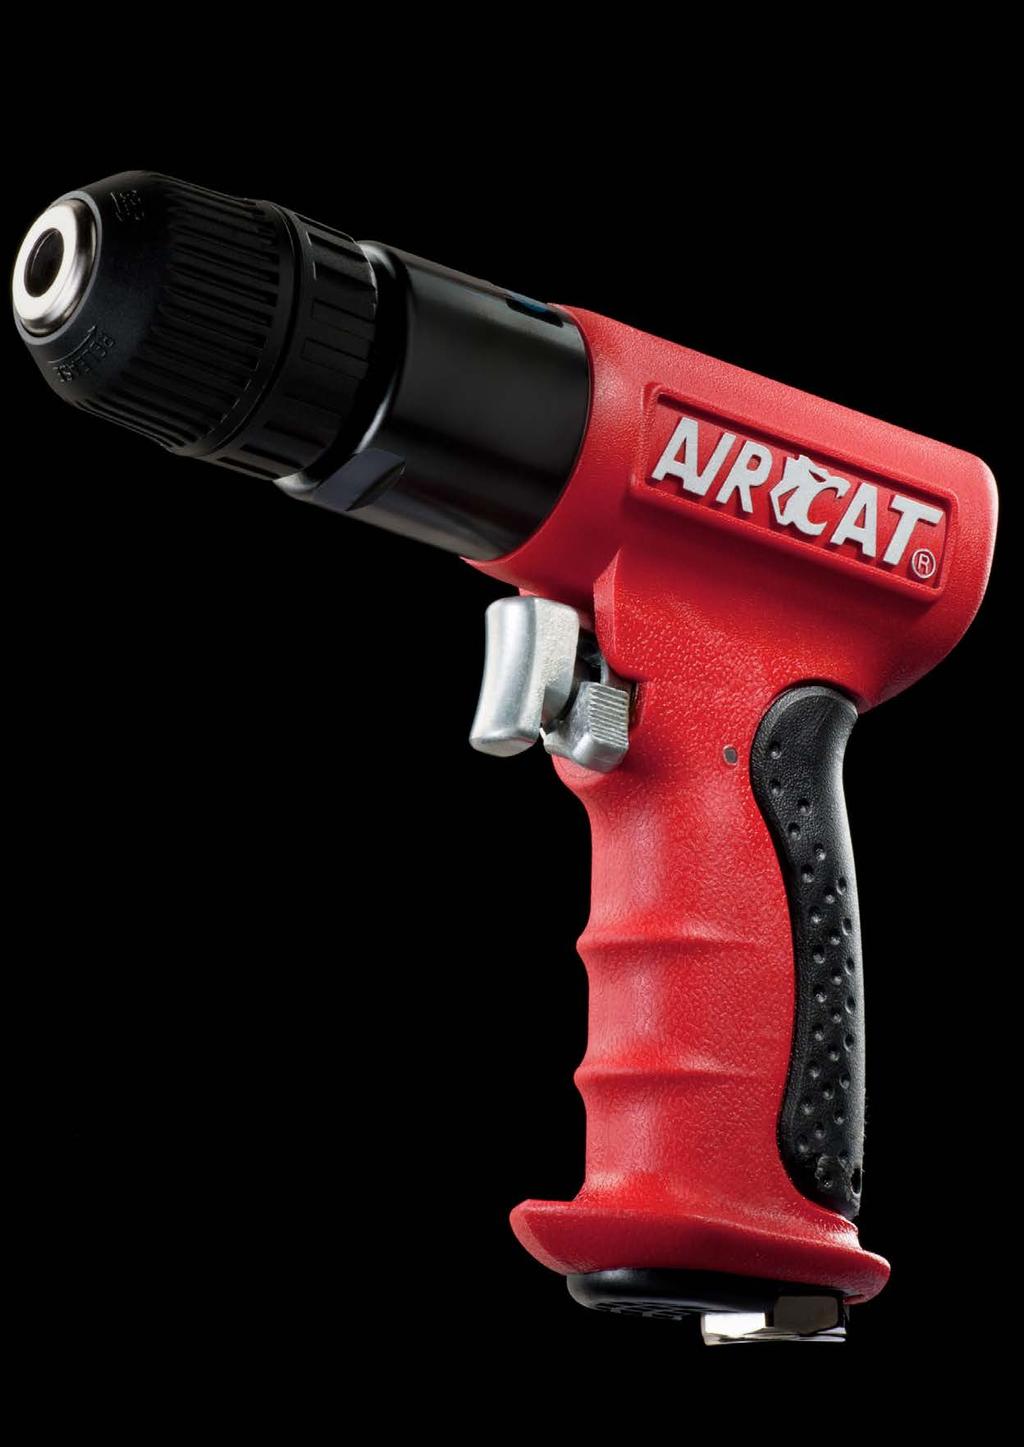 DRILLS, HAMMERS, SANDERS, POLISHERS, TYRE BUFFERS, SAW and NIBBLER AIRCAT's latest designs and innovations add reliability, reduced noise levels and weight, while providing added operator comfort.